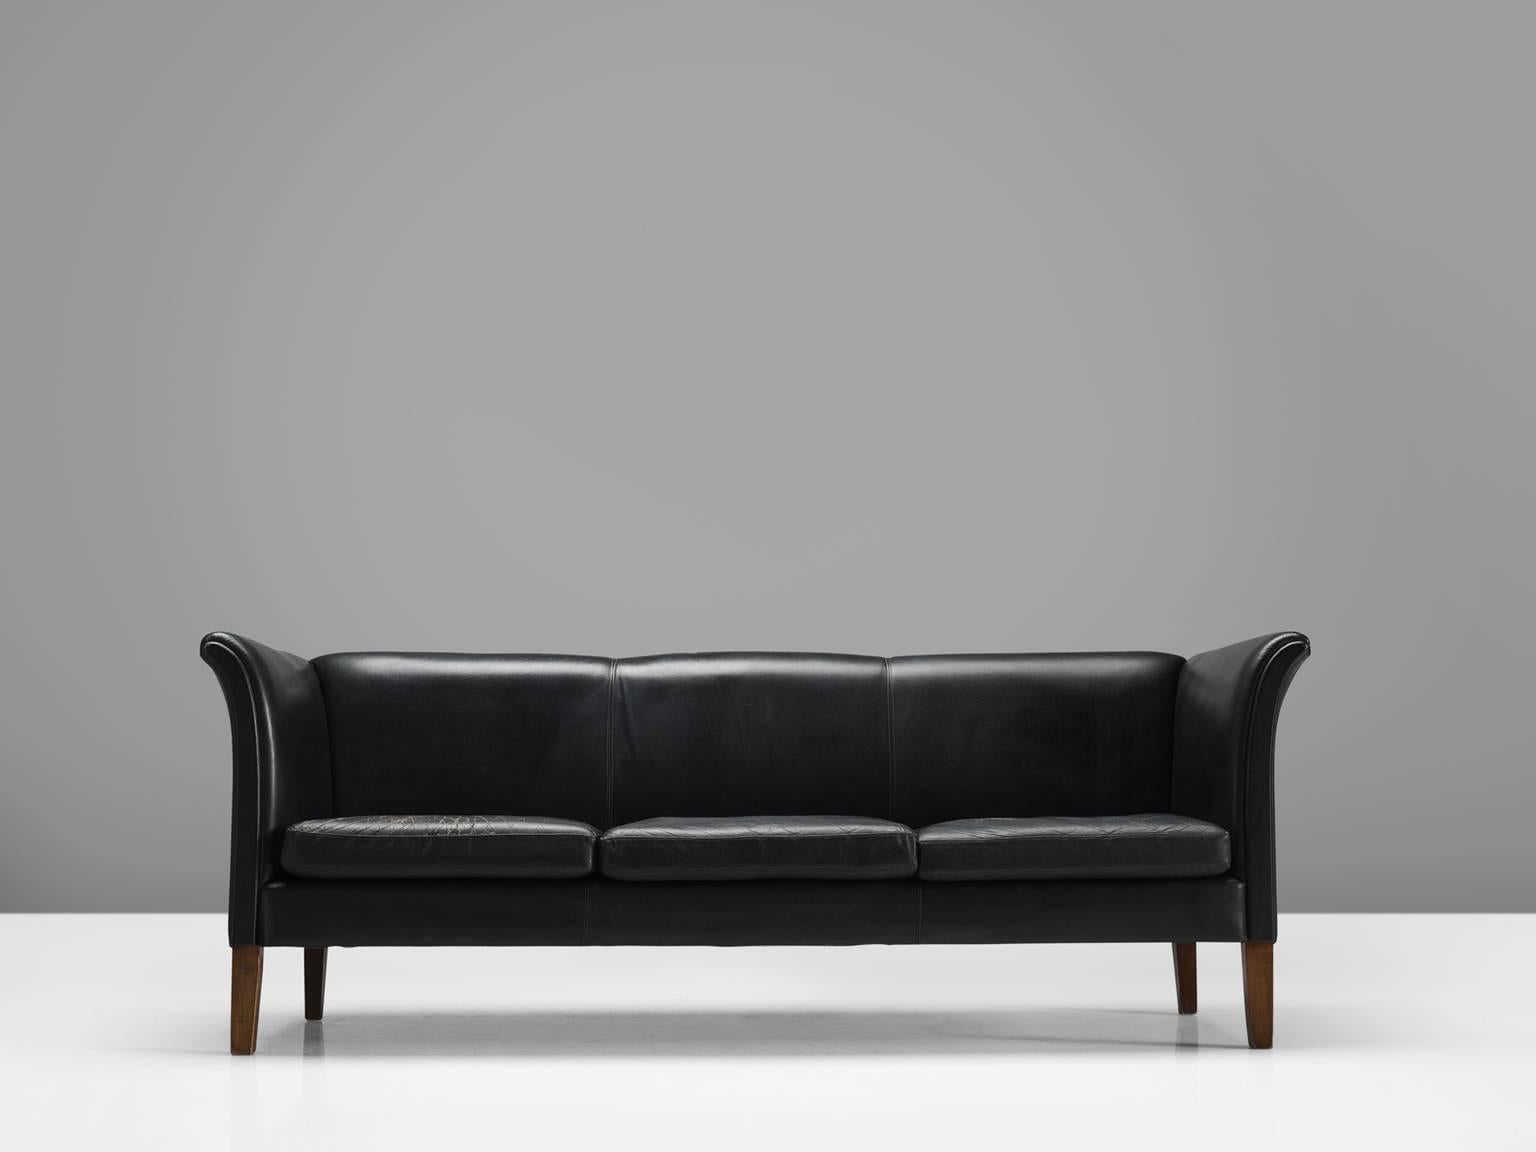 Sofa in leather and wood, Sweden, 1960s. 

Three-seat sofa in high-quality black faux leather. The wooden legs provide a floating appearance to this comfortable sofa. The armrests are beautifully curved and give this sofa it's strong expression by